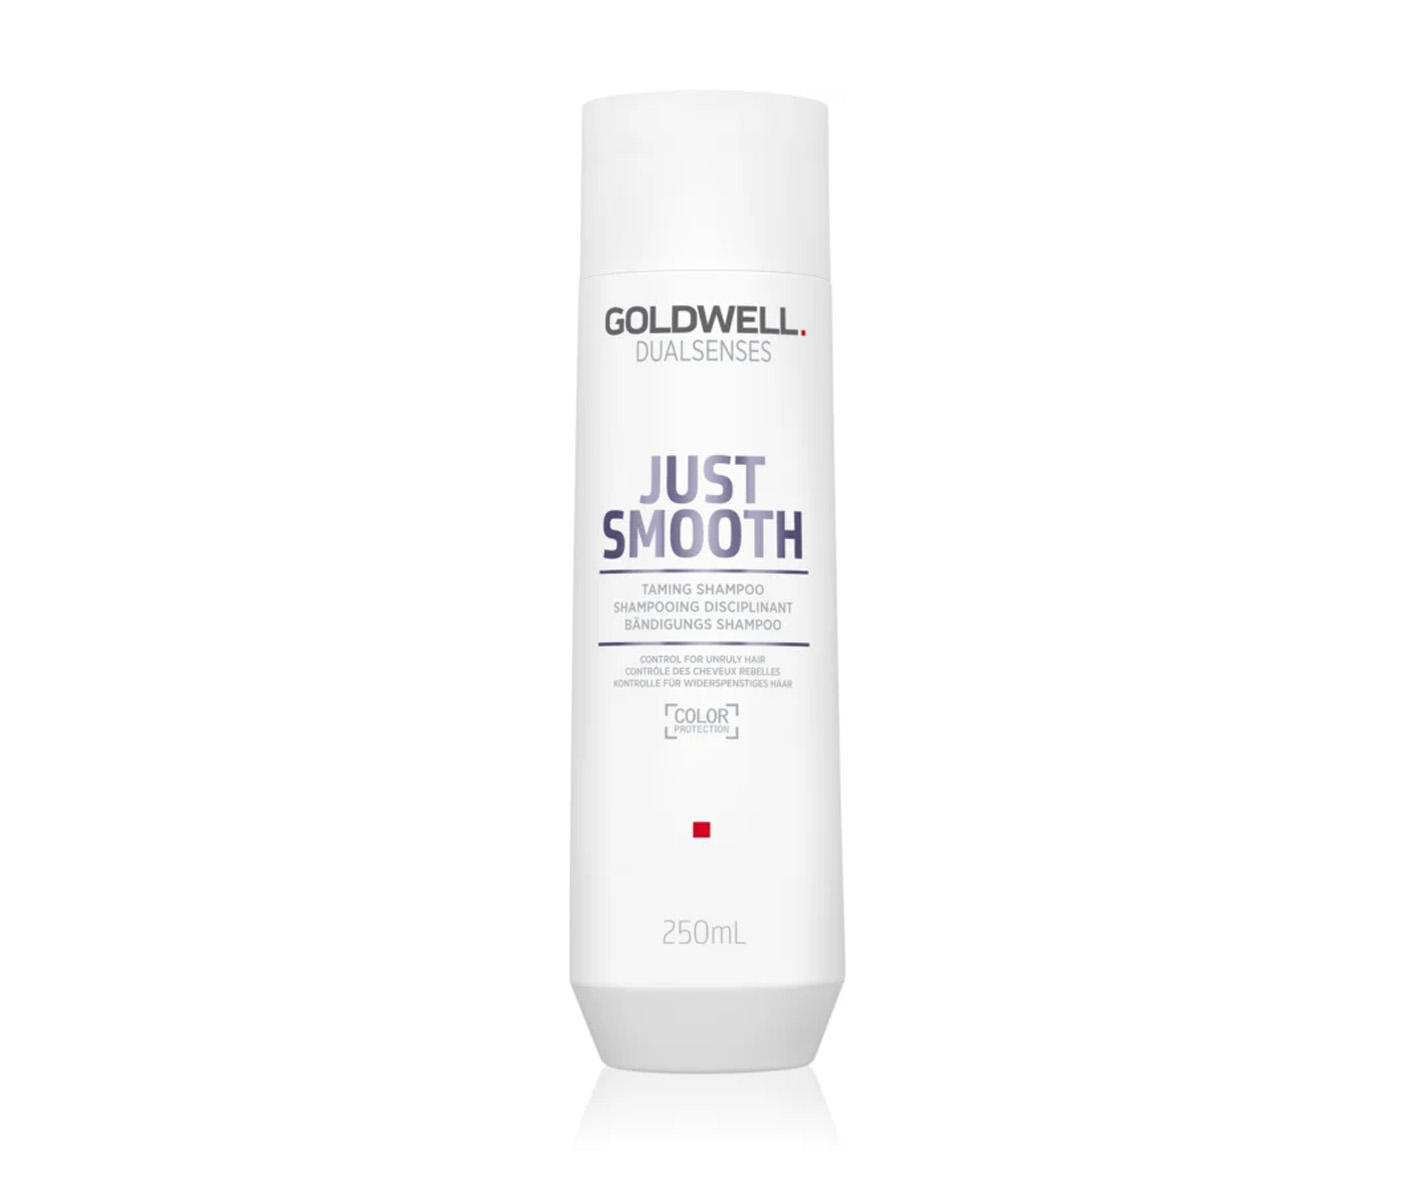 Goldwell Dualsenses Just Smooth, shampoo for frizzy and coloured hair